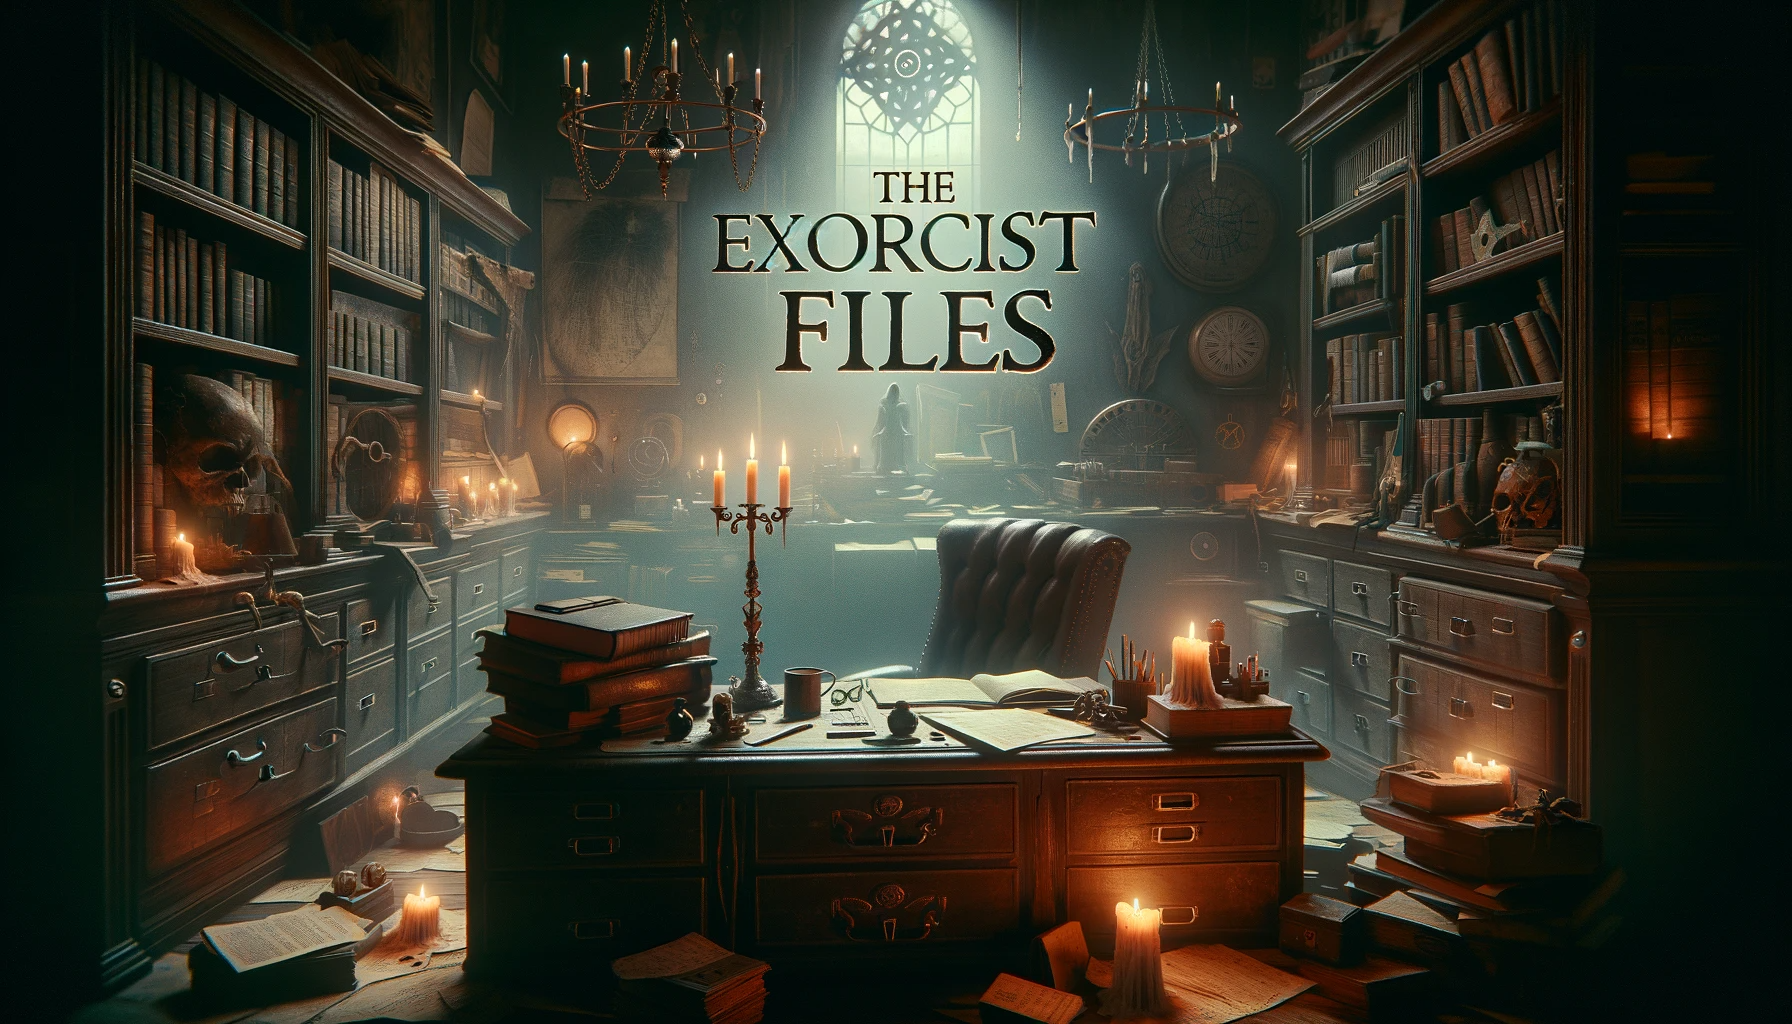 The exorcist files fr. carlos martins